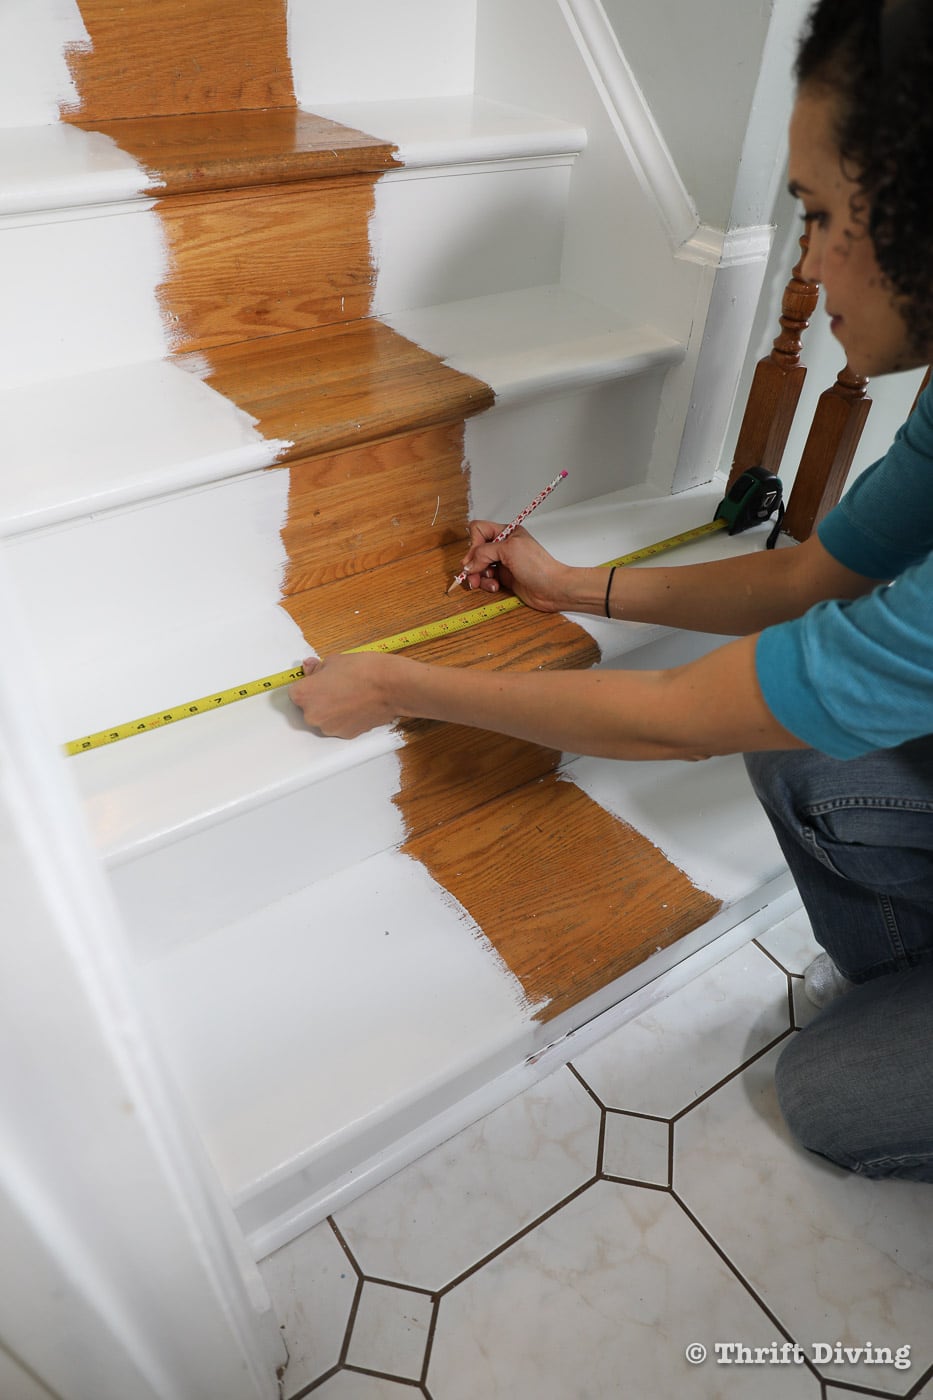 How to Install a Stair Runner - Use a pencil and tape measure to make the center of your stairs before installing rug pads and stair runner. - Thrift Diving